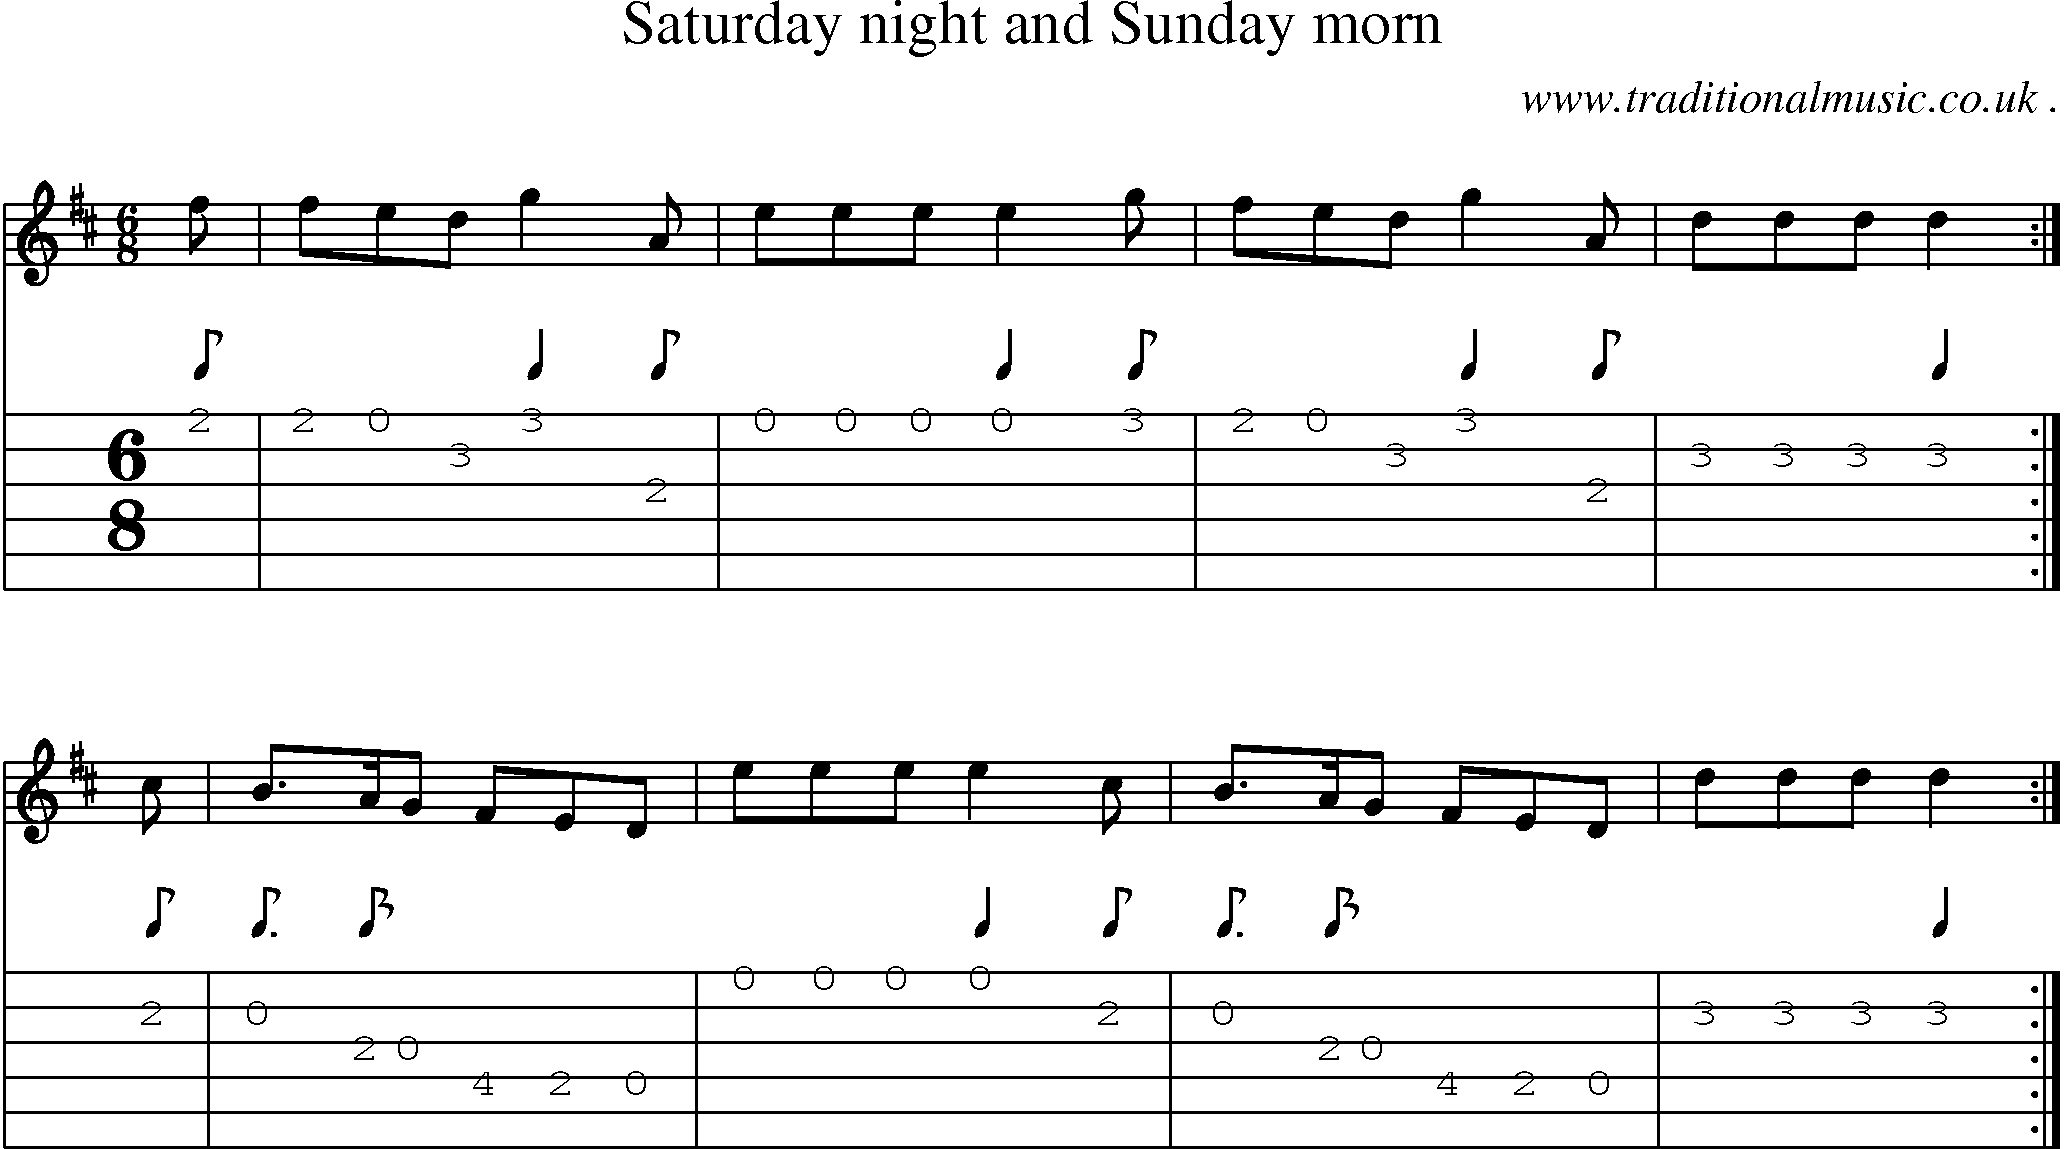 Sheet-music  score, Chords and Guitar Tabs for Saturday Night And Sunday Morn